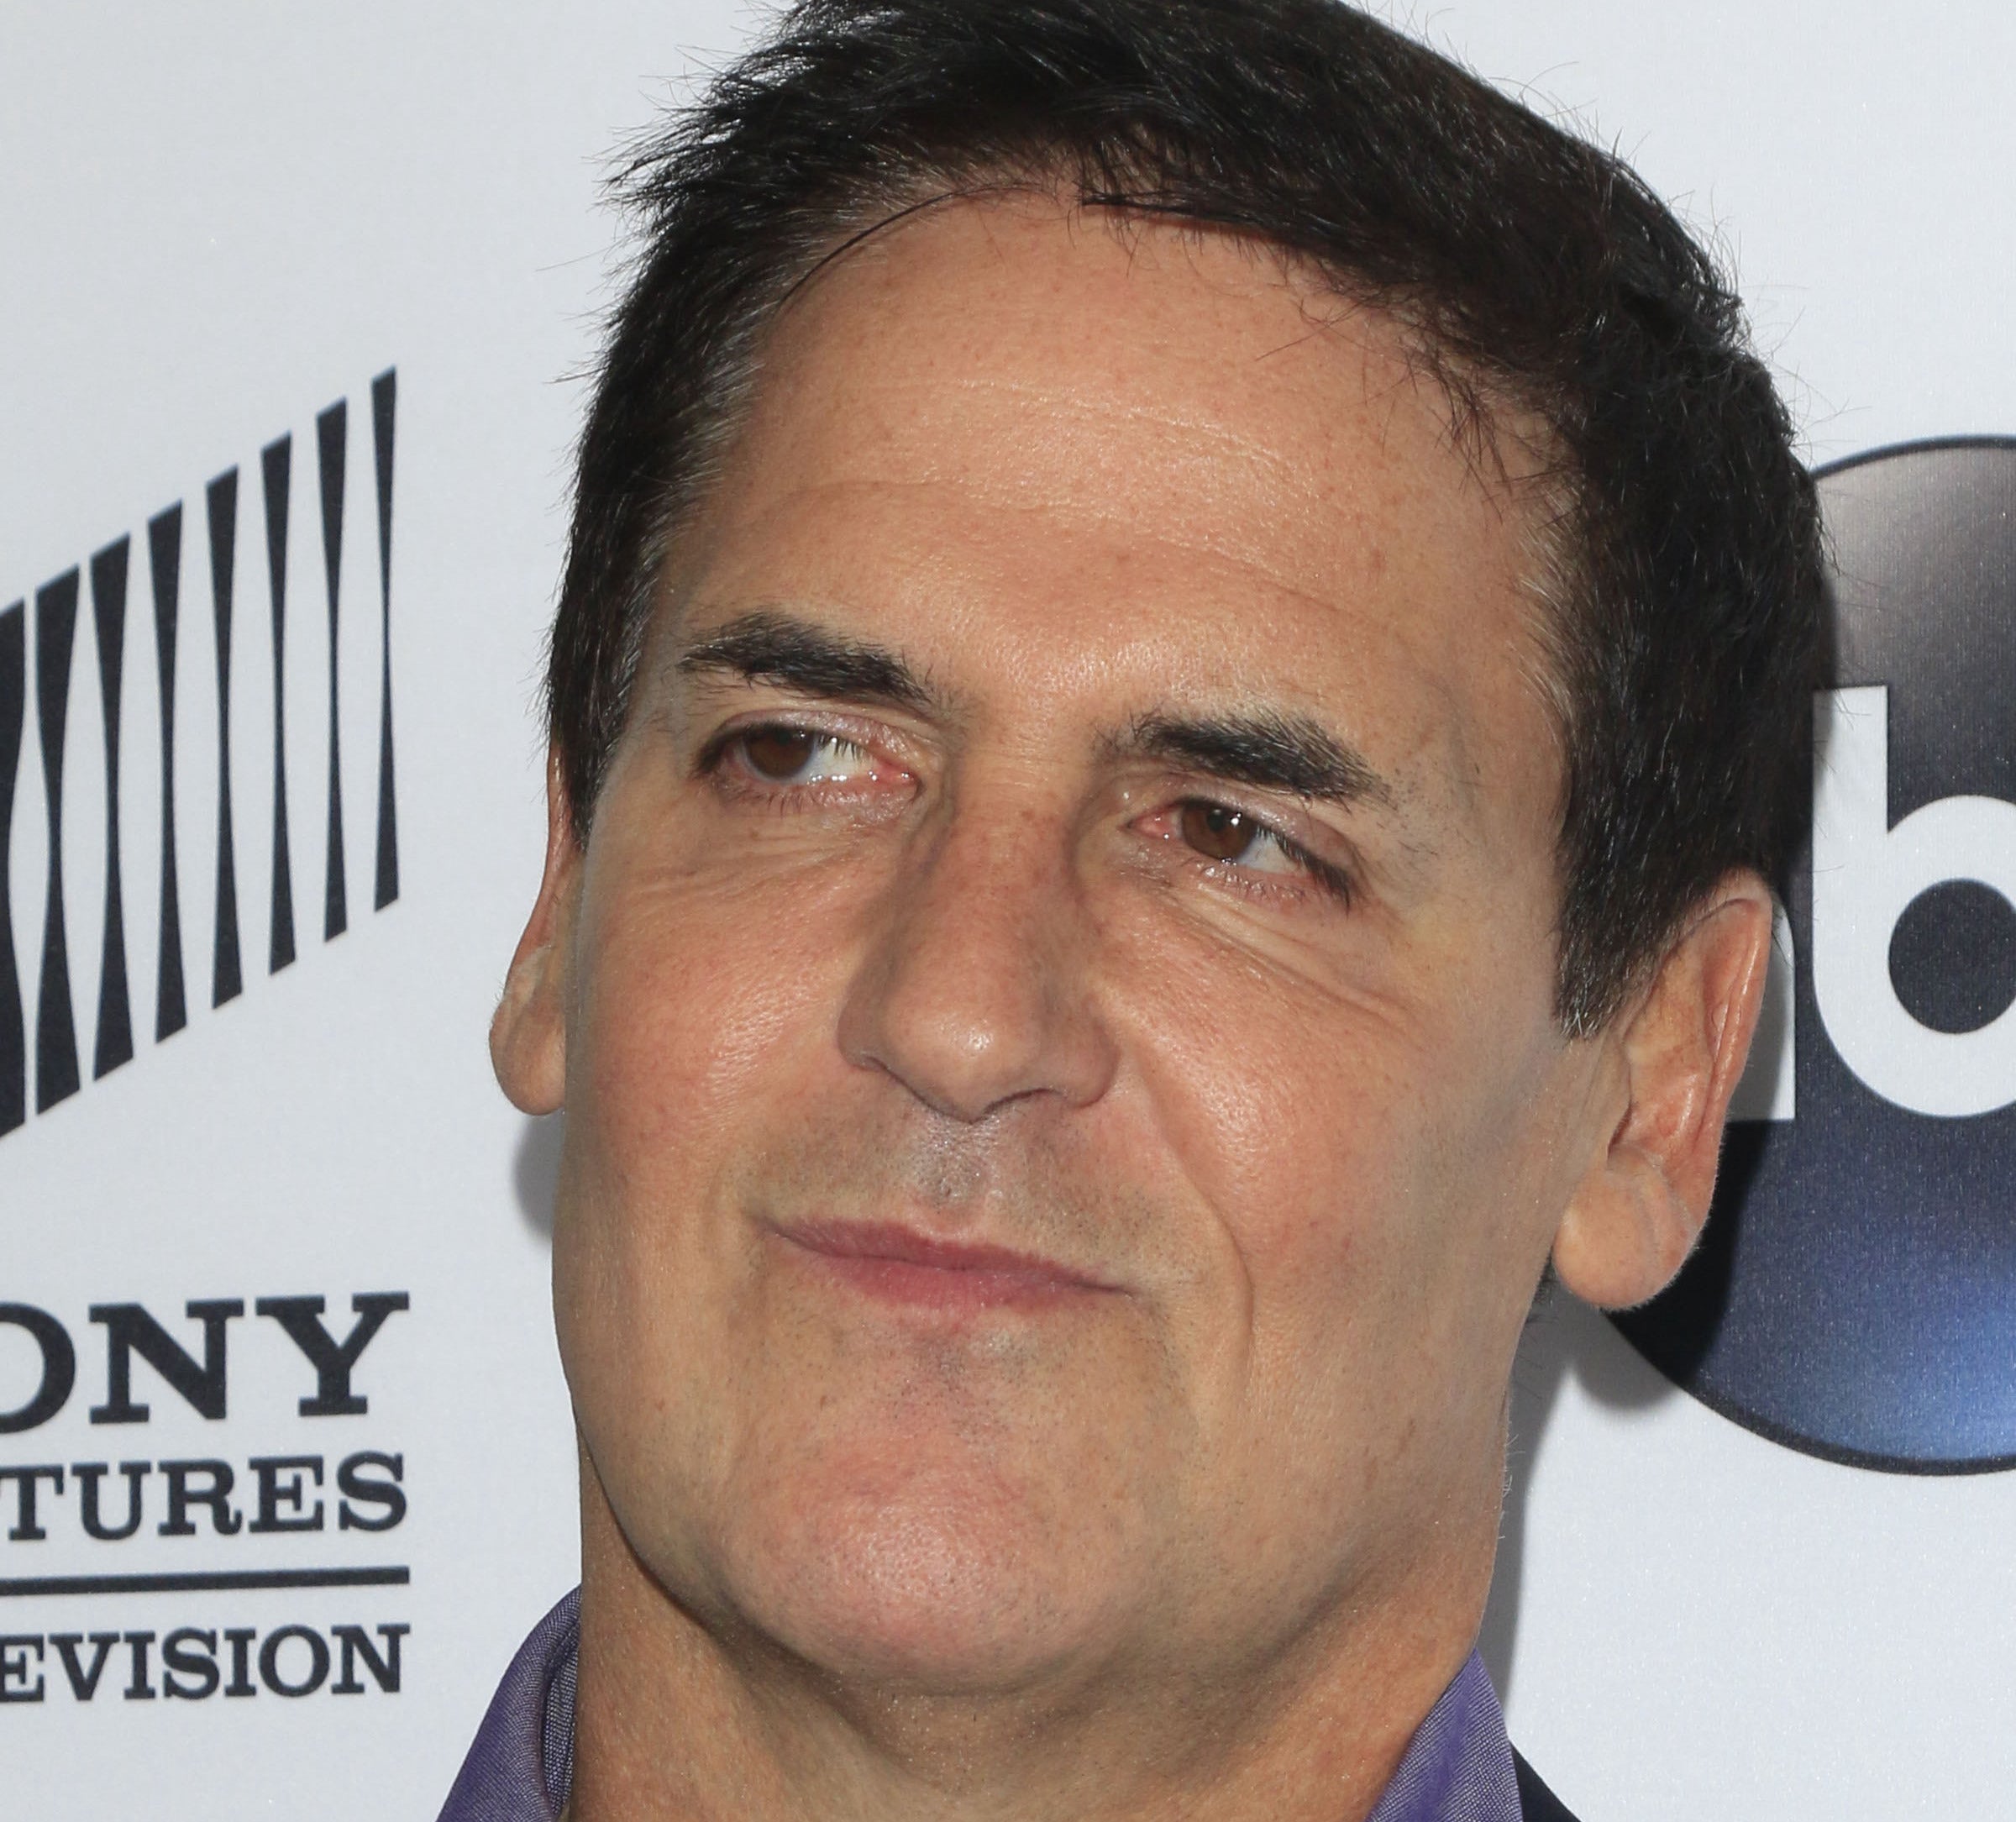 Mark Cuban Warns Crypto Faces Nightmare From SEC's Next Move: 'Wait Till You See What They Come Up With'